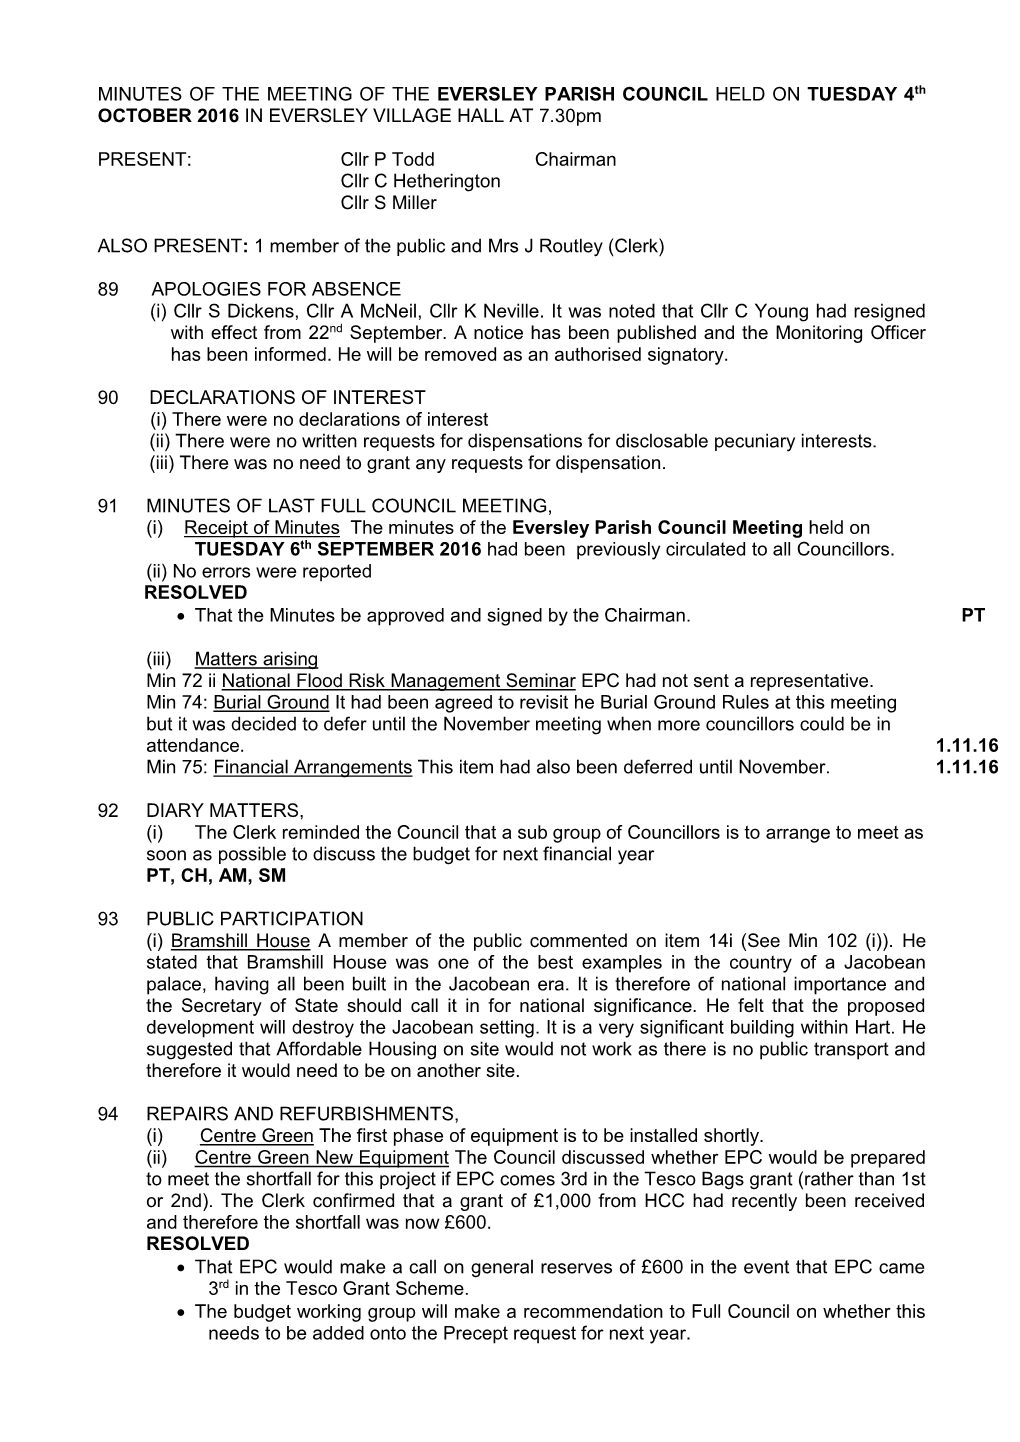 MINUTES of the MEETING of the EVERSLEY PARISH COUNCIL HELD on TUESDAY 4Th NOVEMBER 2014 in EVERSLEY VILLAGE HALL at 8